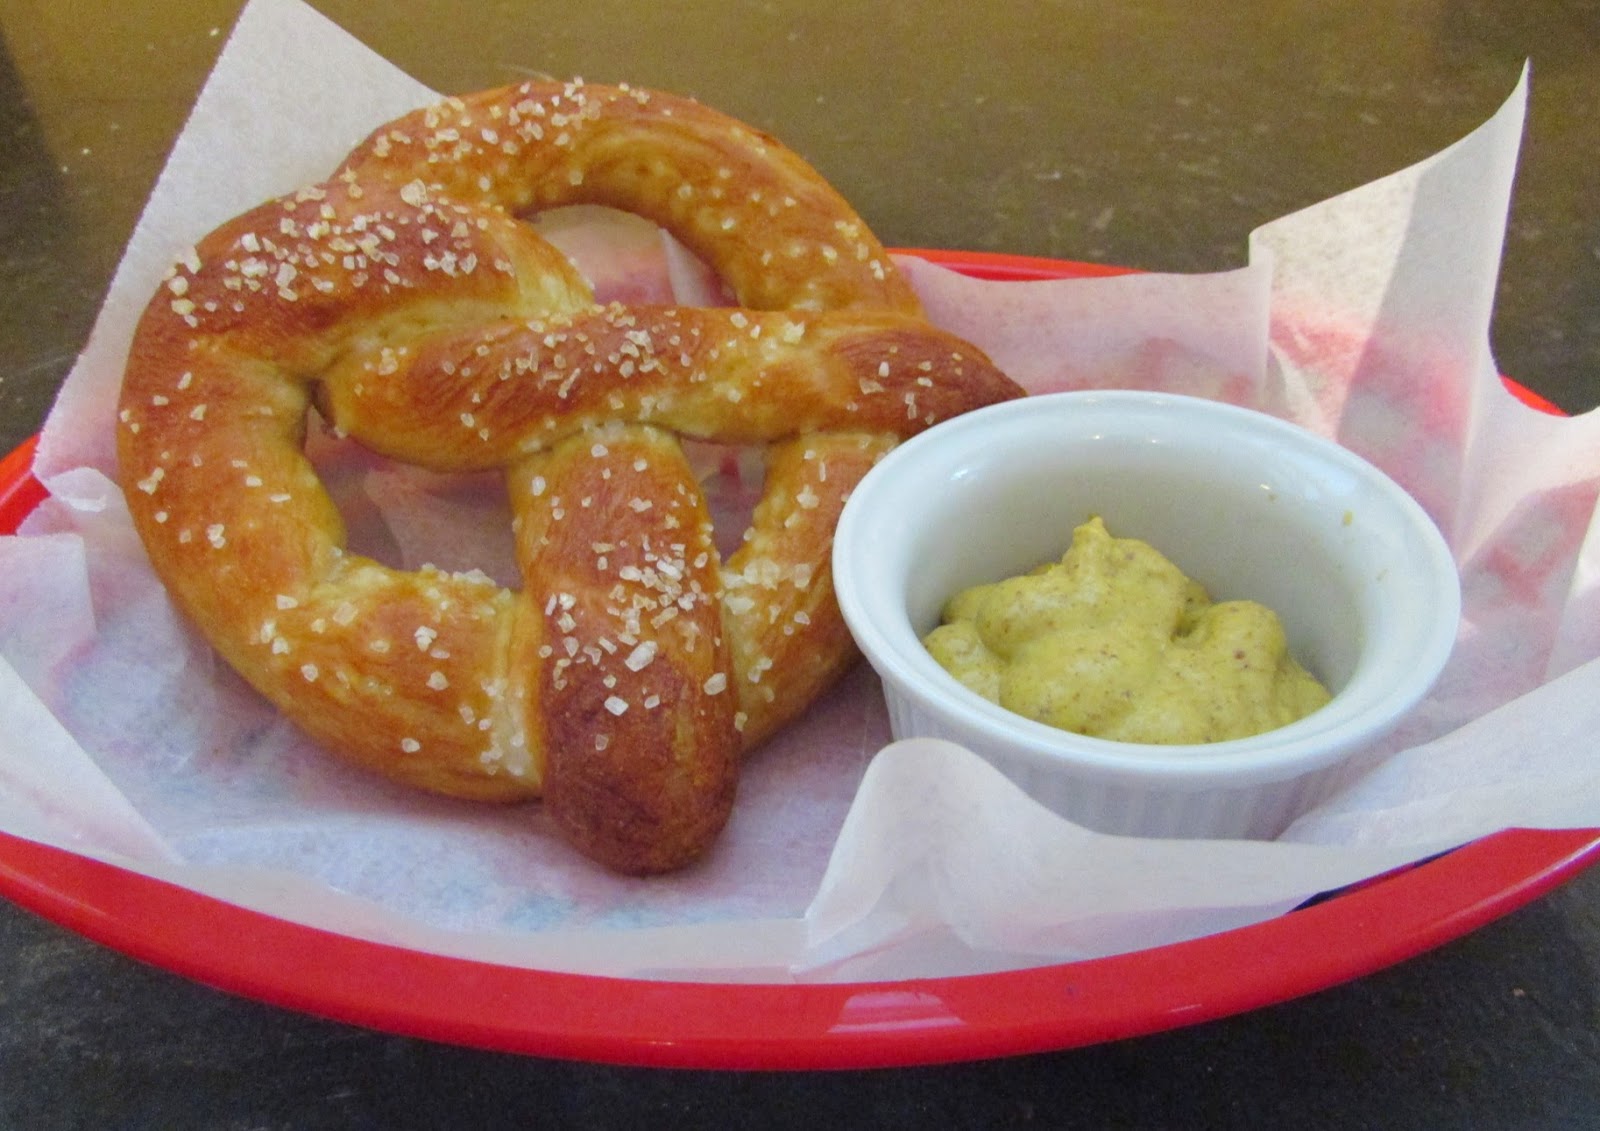 Homemade salty soft pretzel in basket with container of grainy mustard.